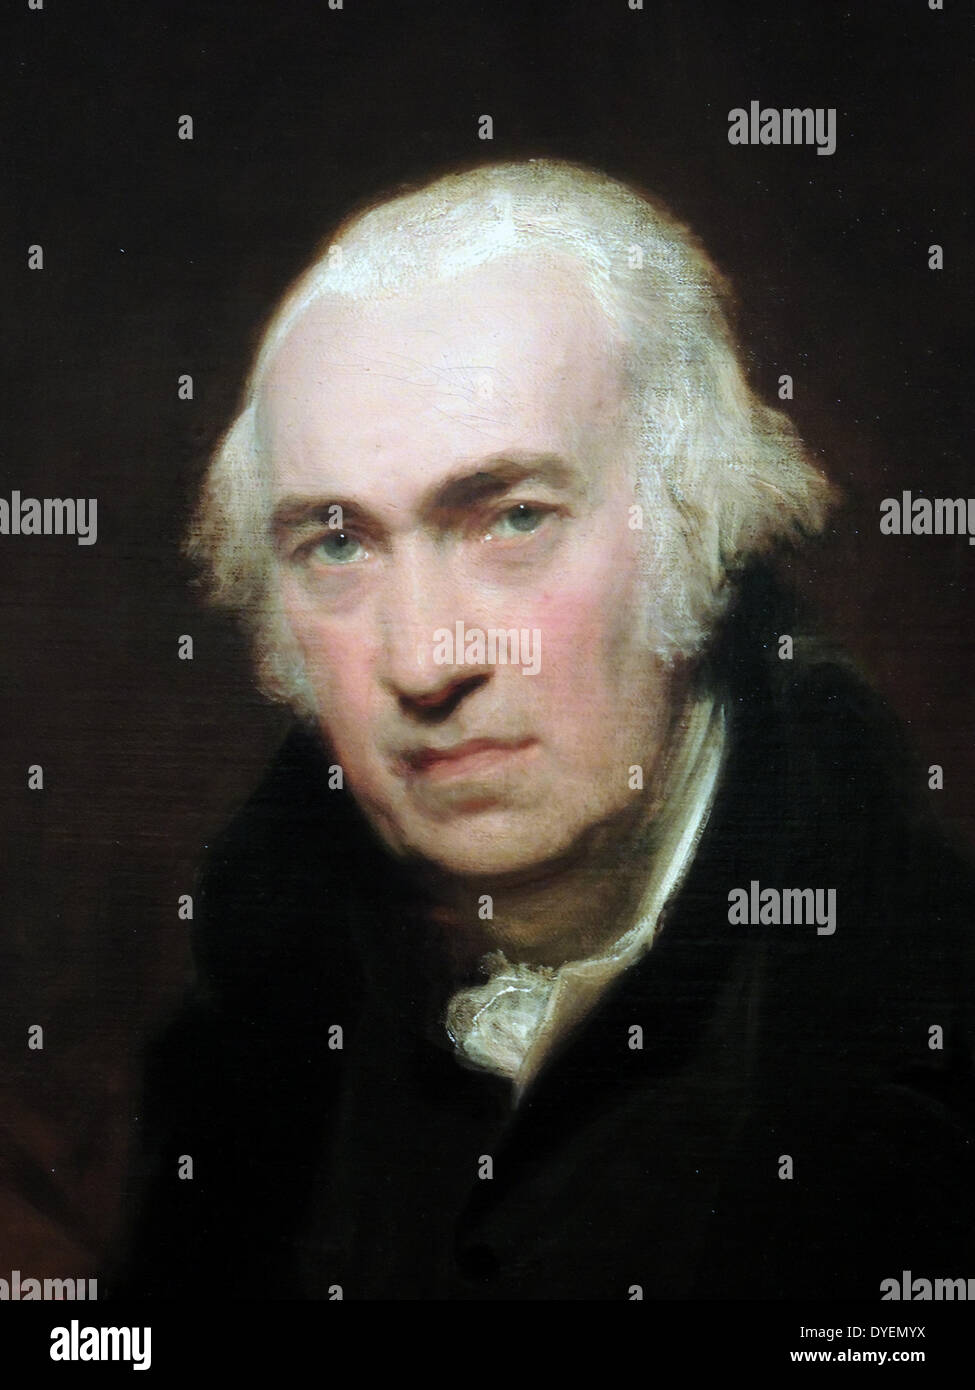 Portrait of James Watt, 1812 by Sir Thomas Lawrence (1769-1830).  Oil on canvas.  James Watt (born in Greenock, Renfrewshire, Scotland 1736 - died 1819 in Handsworth, Birmingham, England aged 83.) Scottish inventor and mechanical engineer whose improvements to the steam engine were fundamental to the changes brought by the Industrial Revolution in both Great Britain and the rest of the world. Birmingham Museum. Stock Photo